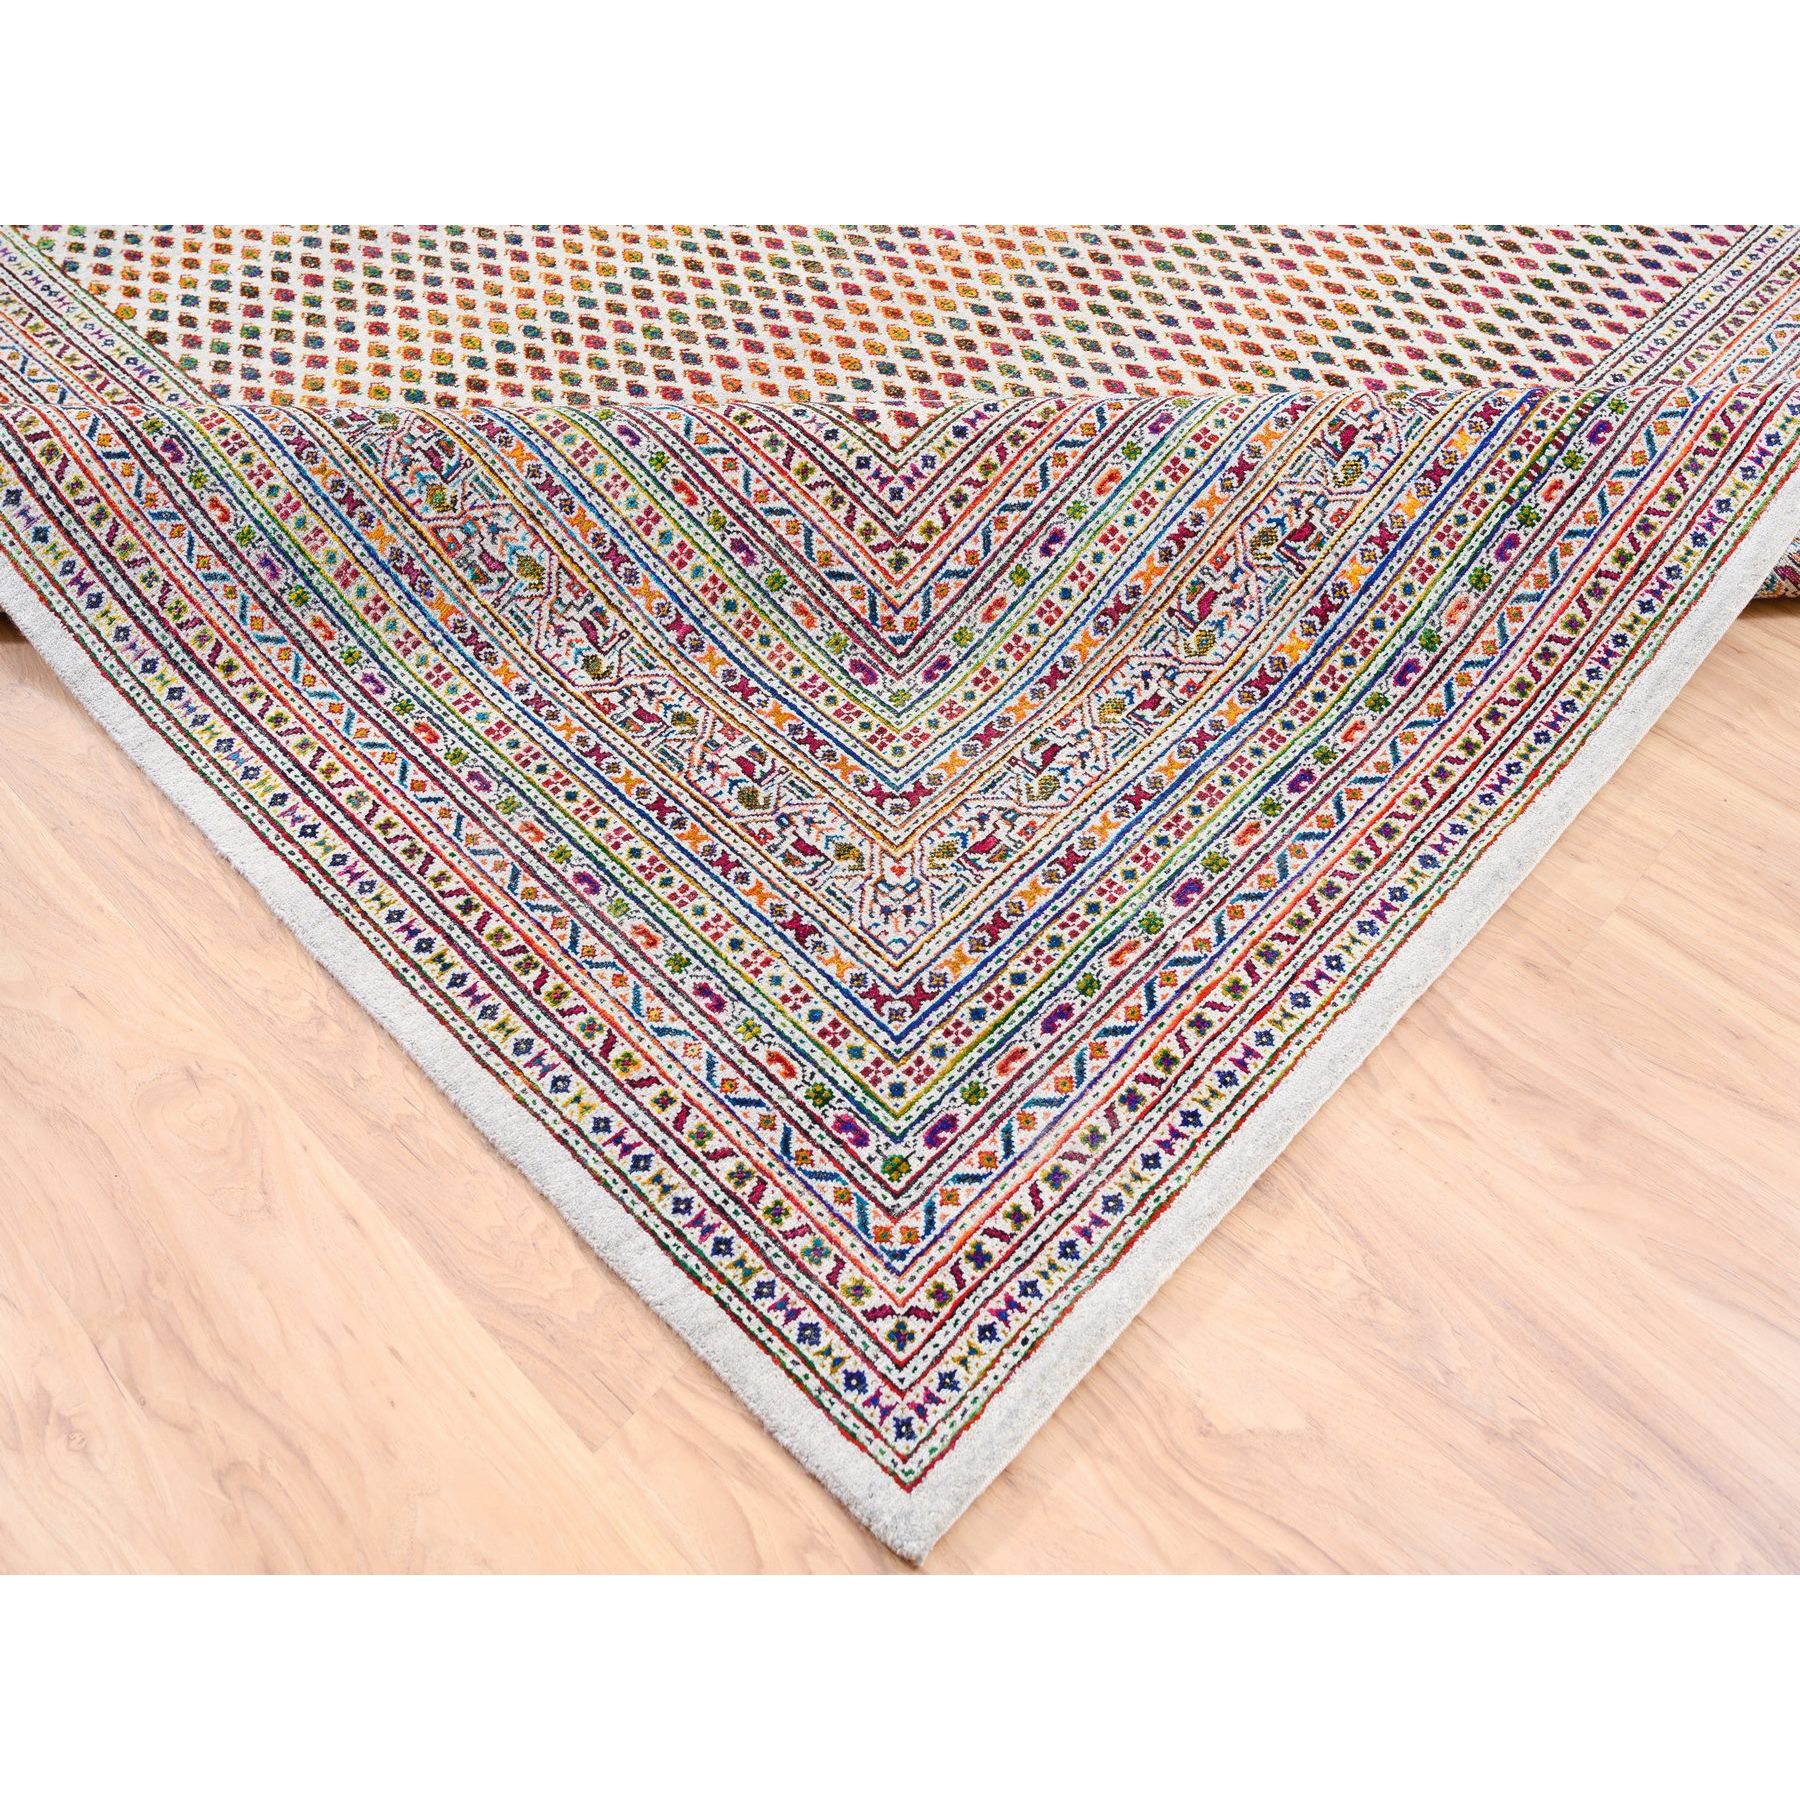 9'10"x14' Colorful Wool And Sari Silk Sarouk Mir Inspired With Repetitive Boteh Design Hand Woven Oriental Rug 